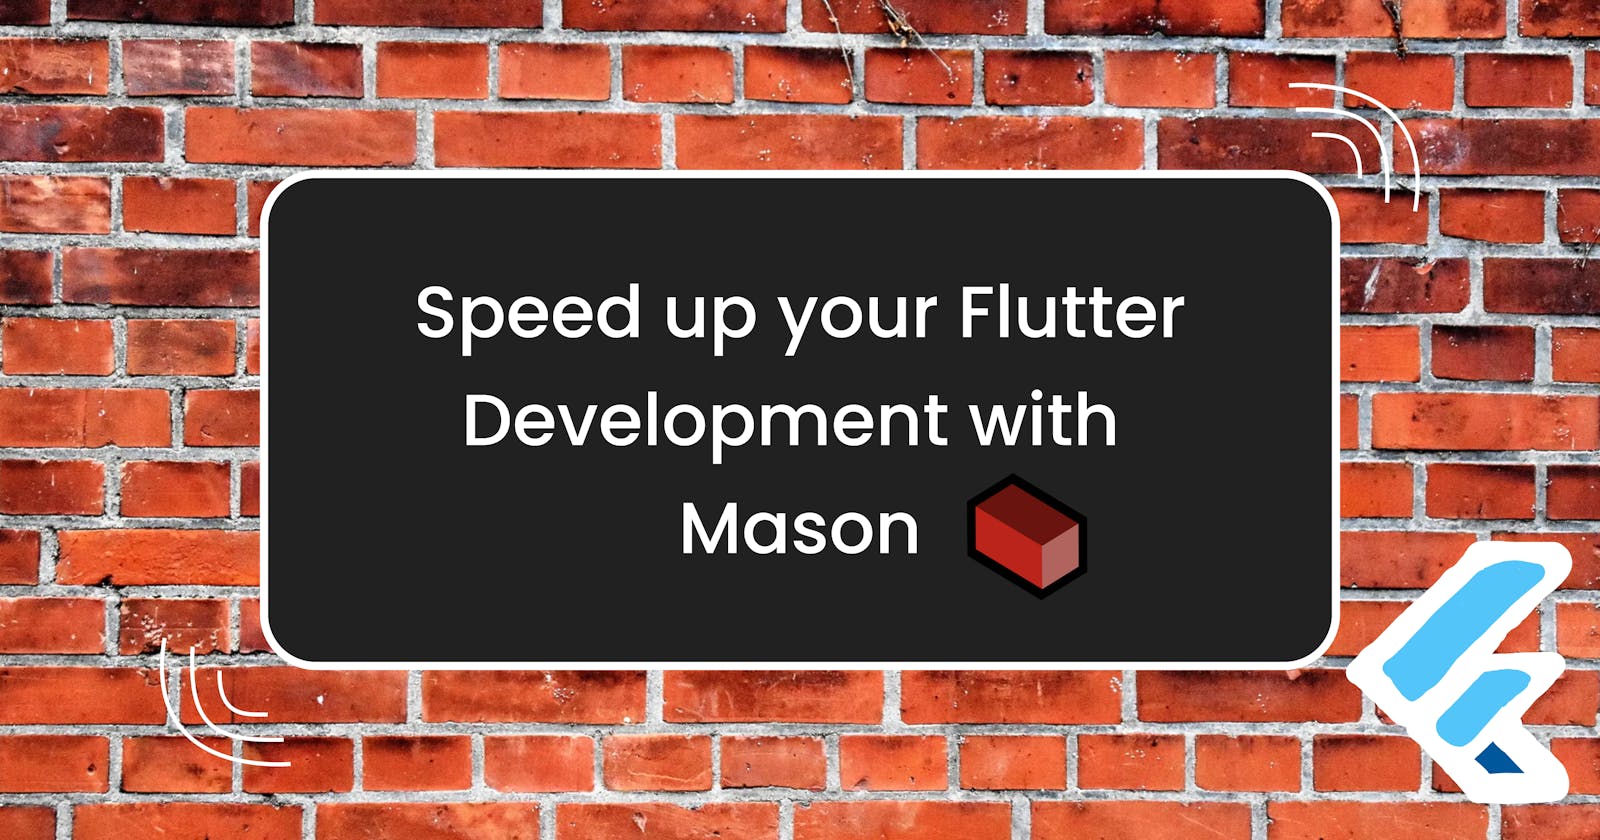 Speed up your Flutter development with Mason